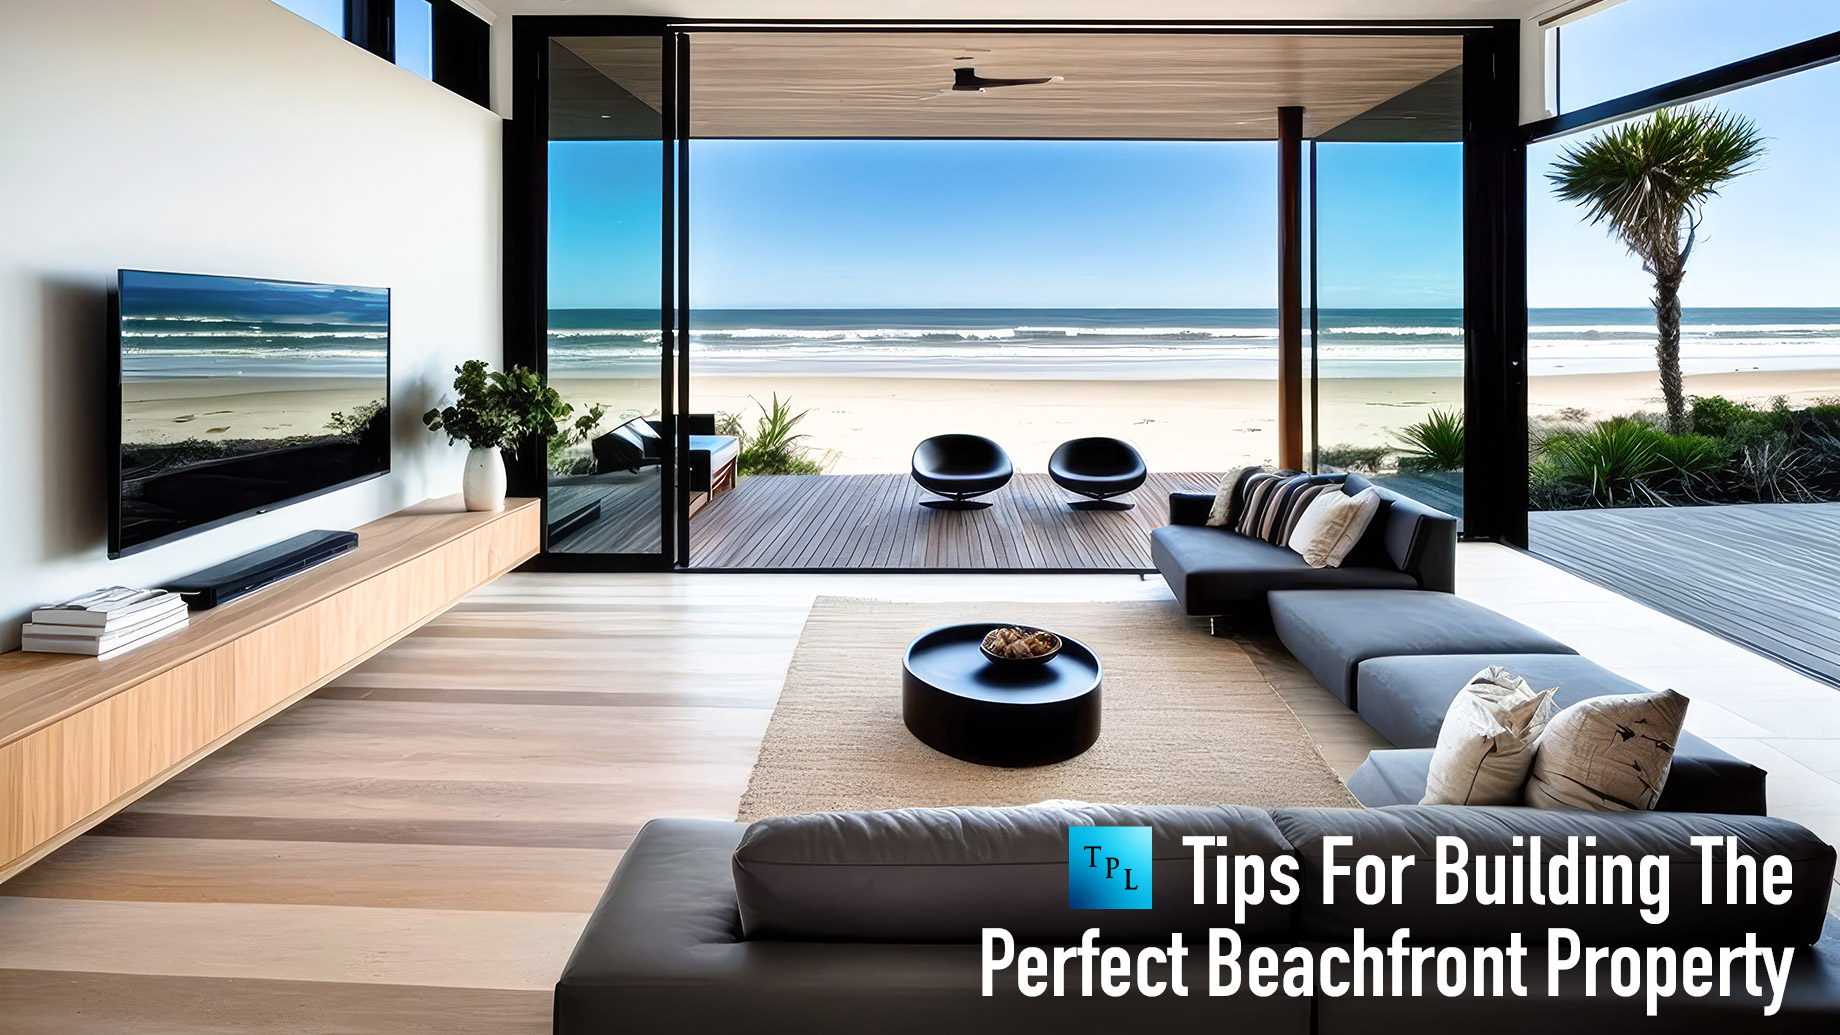 Tips For Building The Perfect Beachfront Property